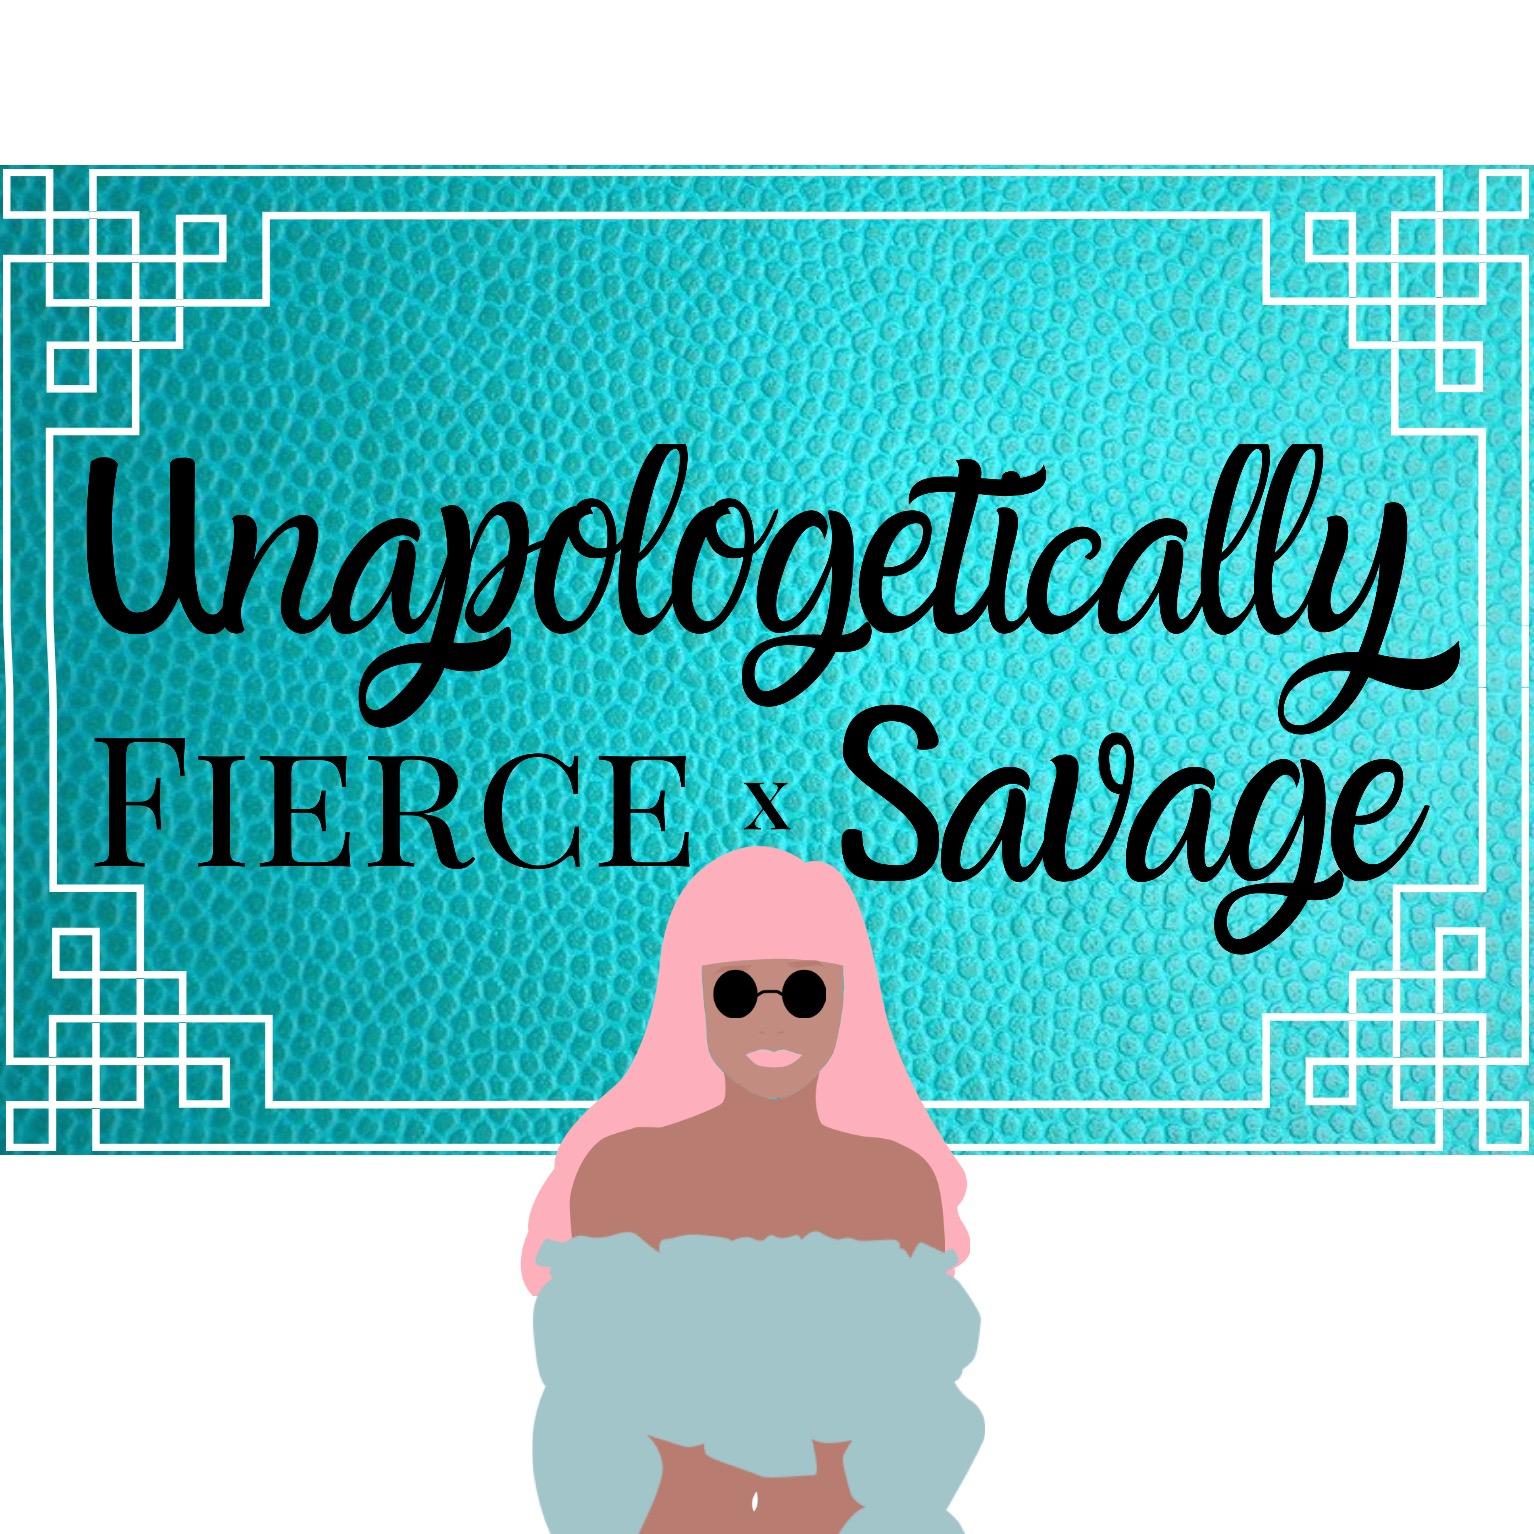 Unapologetically FIERCE X SAVAGE